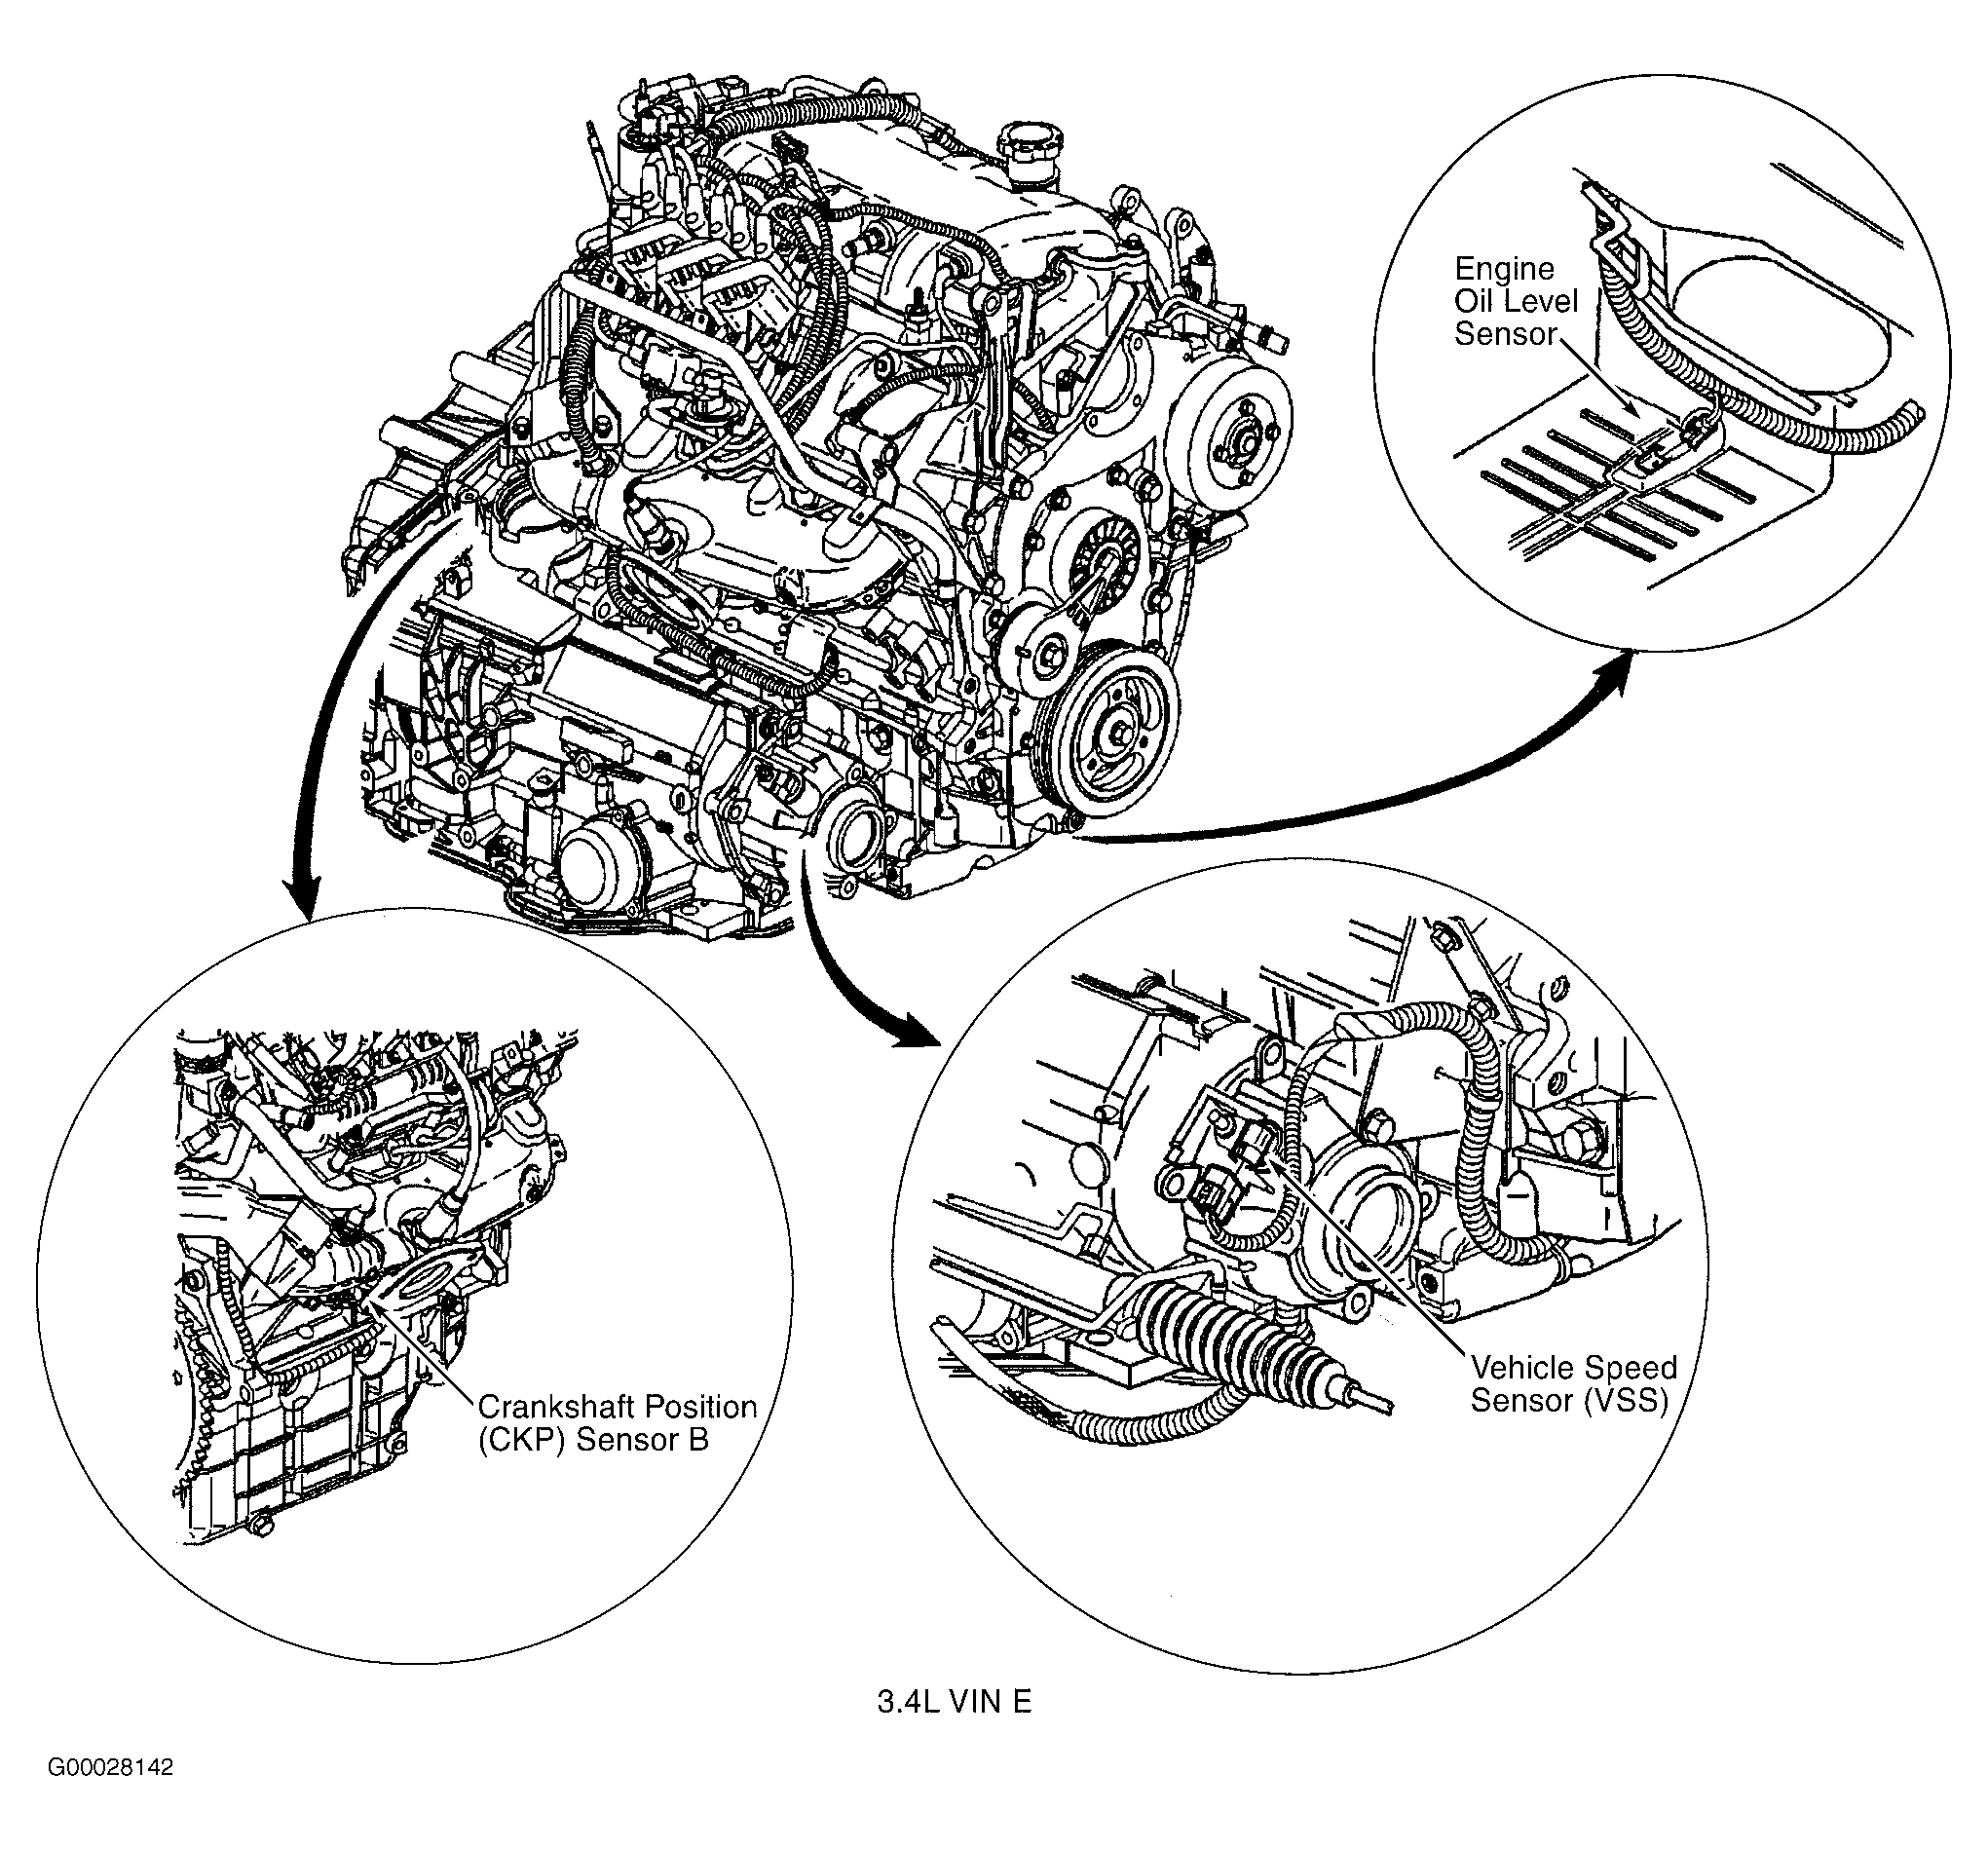 Chevrolet Monte Carlo SS 2003 - Component Locations -  Right Side Of Engine (3.4L VIN E)